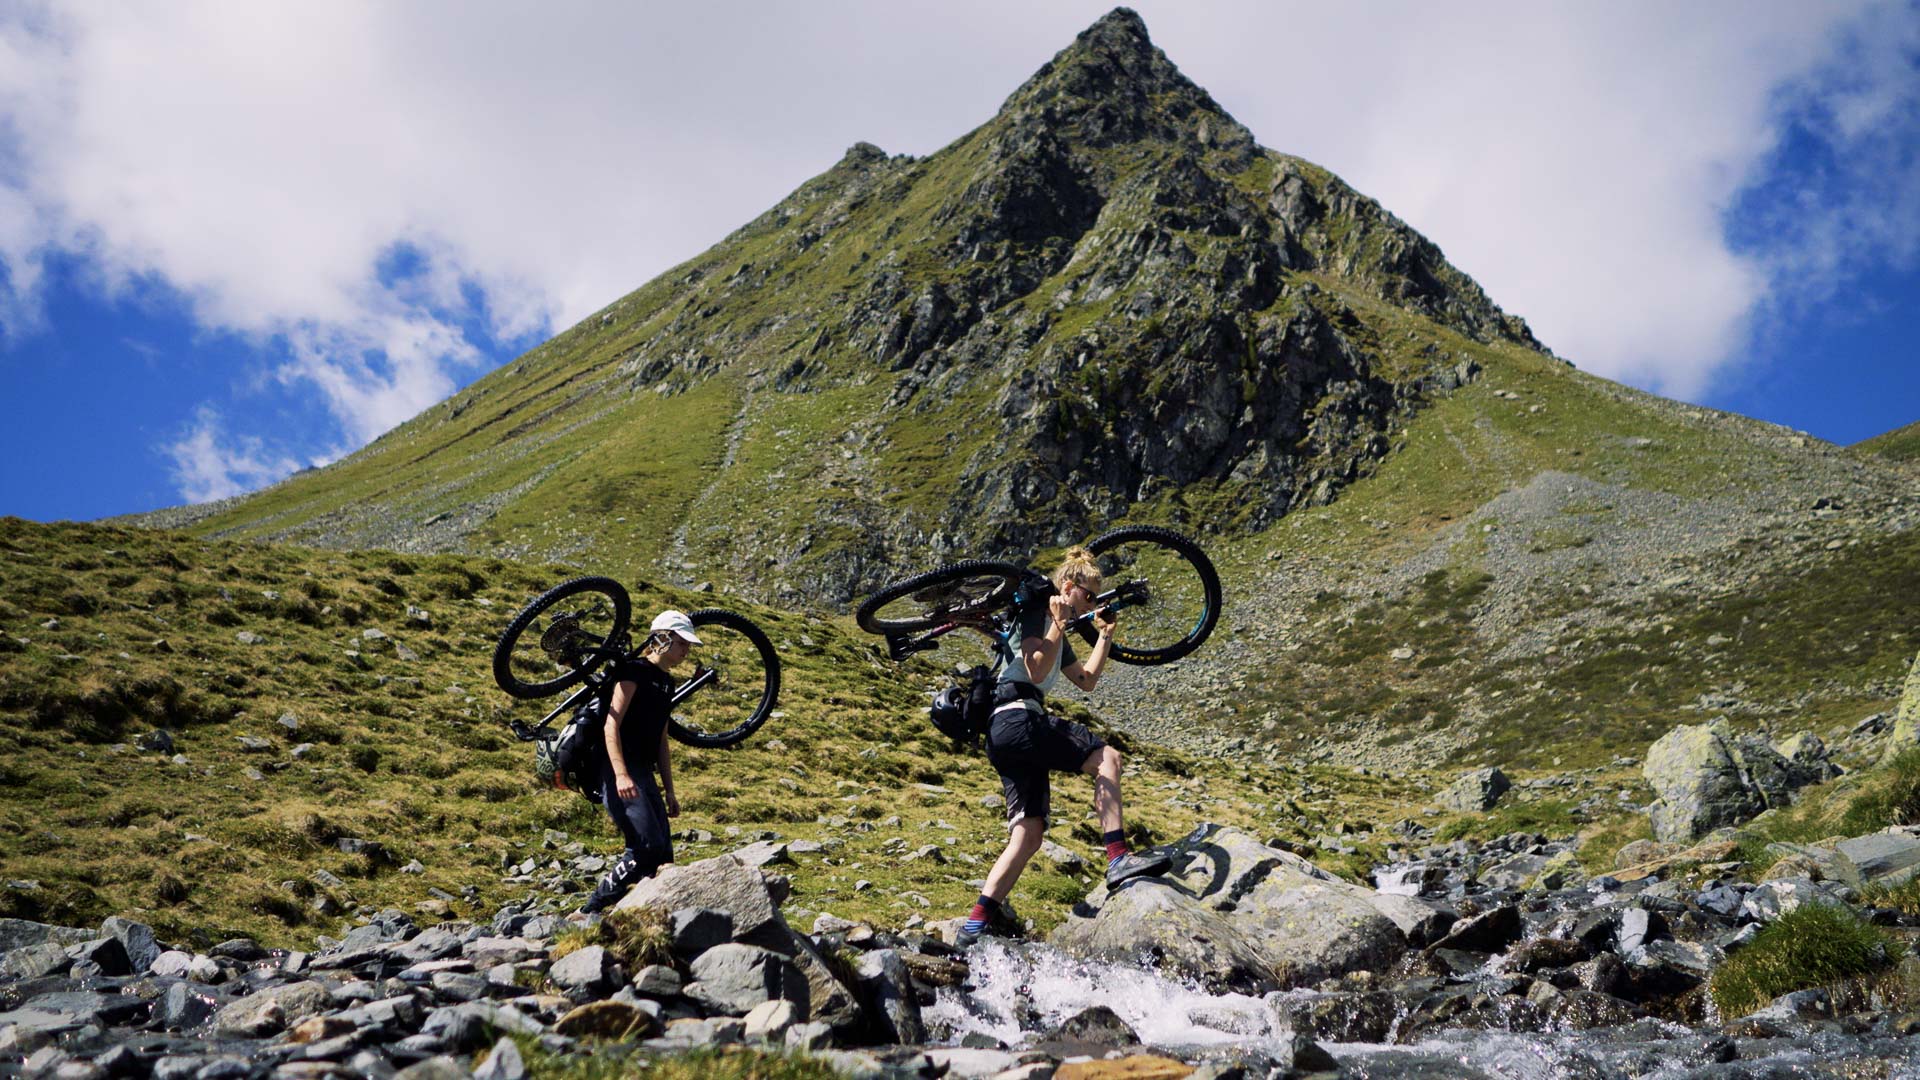 Two women carry their mountain bikes across a river in the Alps, a steep mountain is in the background.